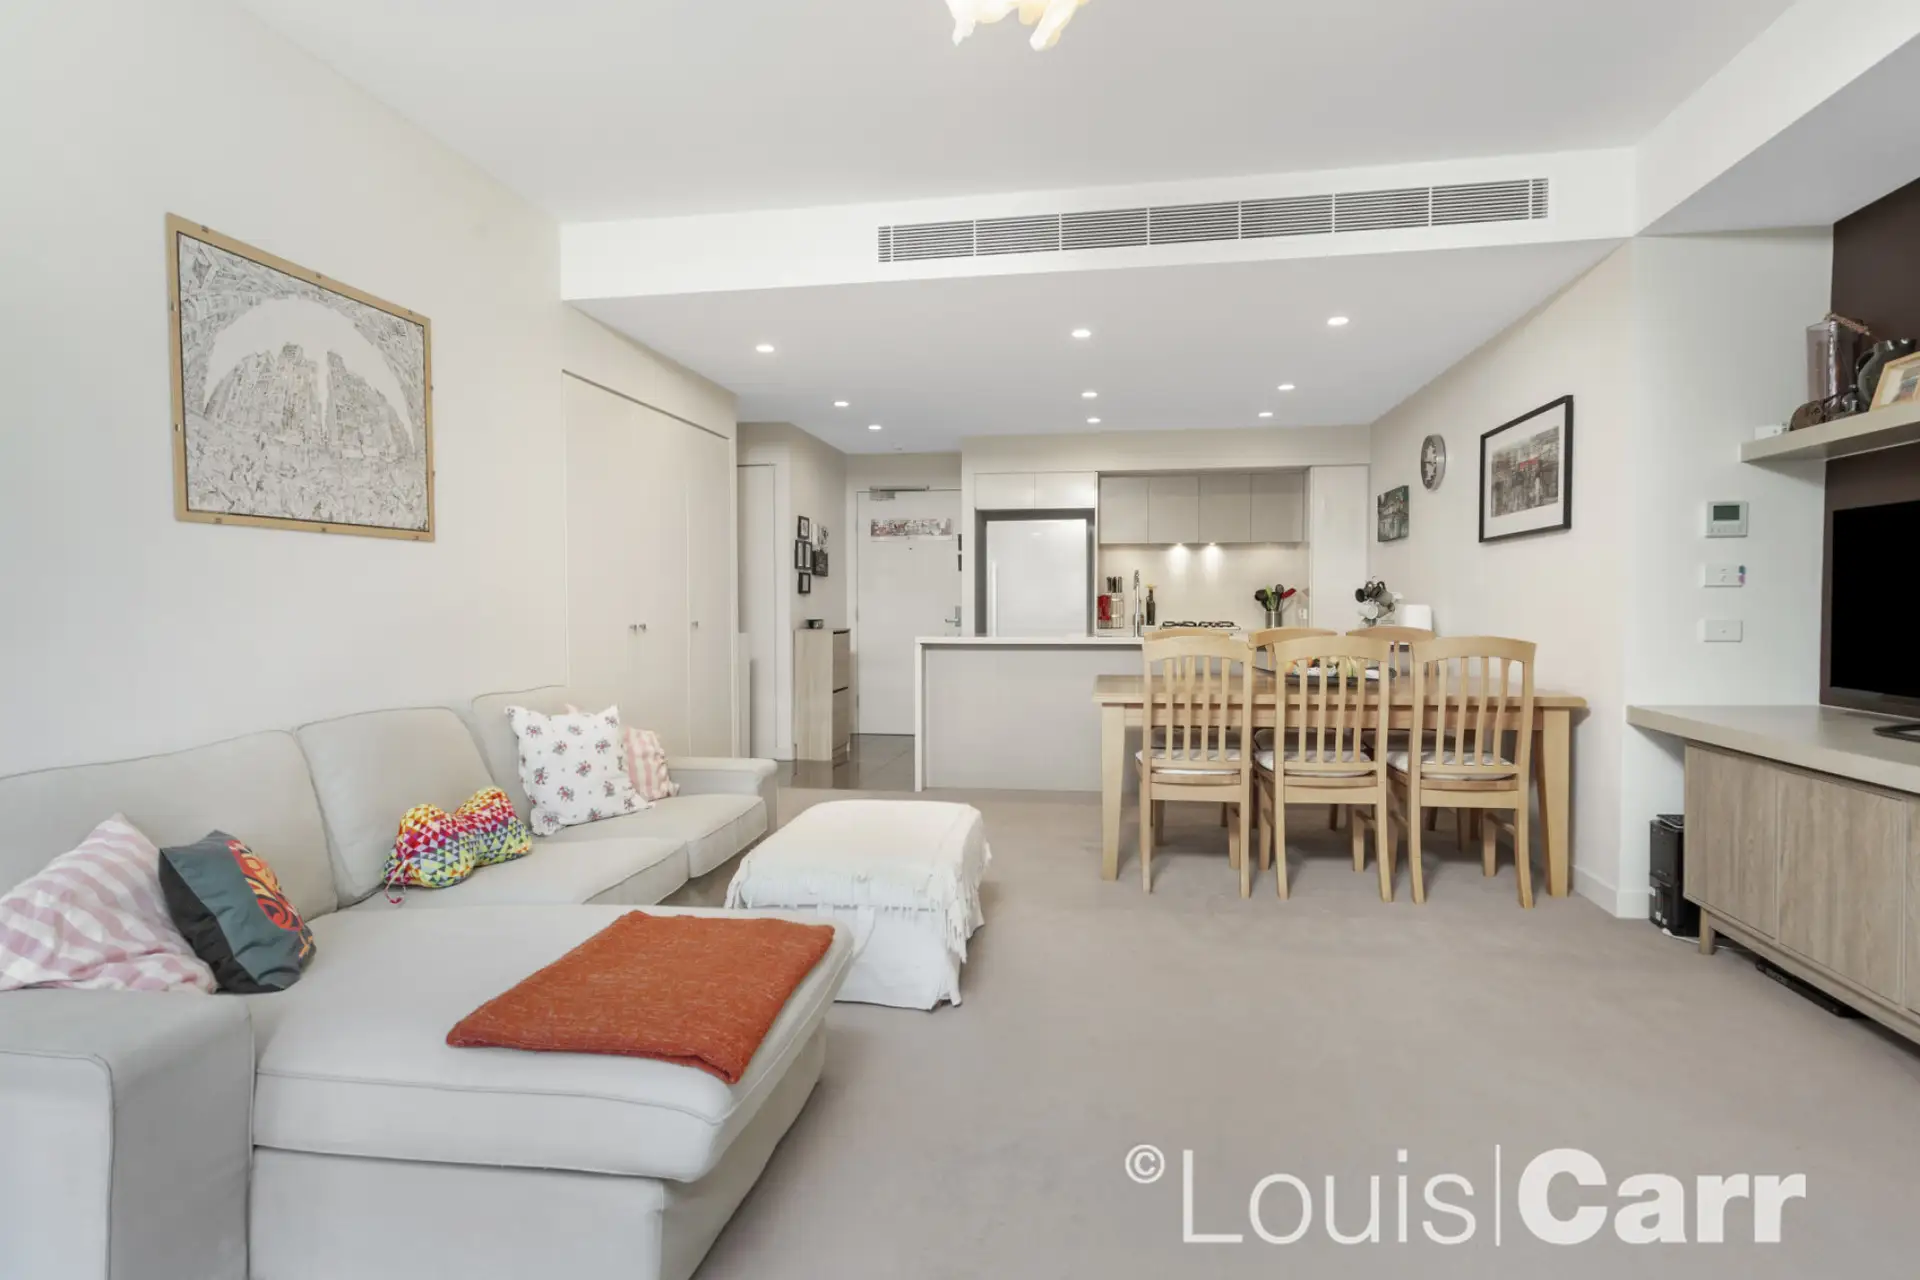 Photo #1: 101N/1 Lardelli Drive, Ryde - Sold by Louis Carr Real Estate